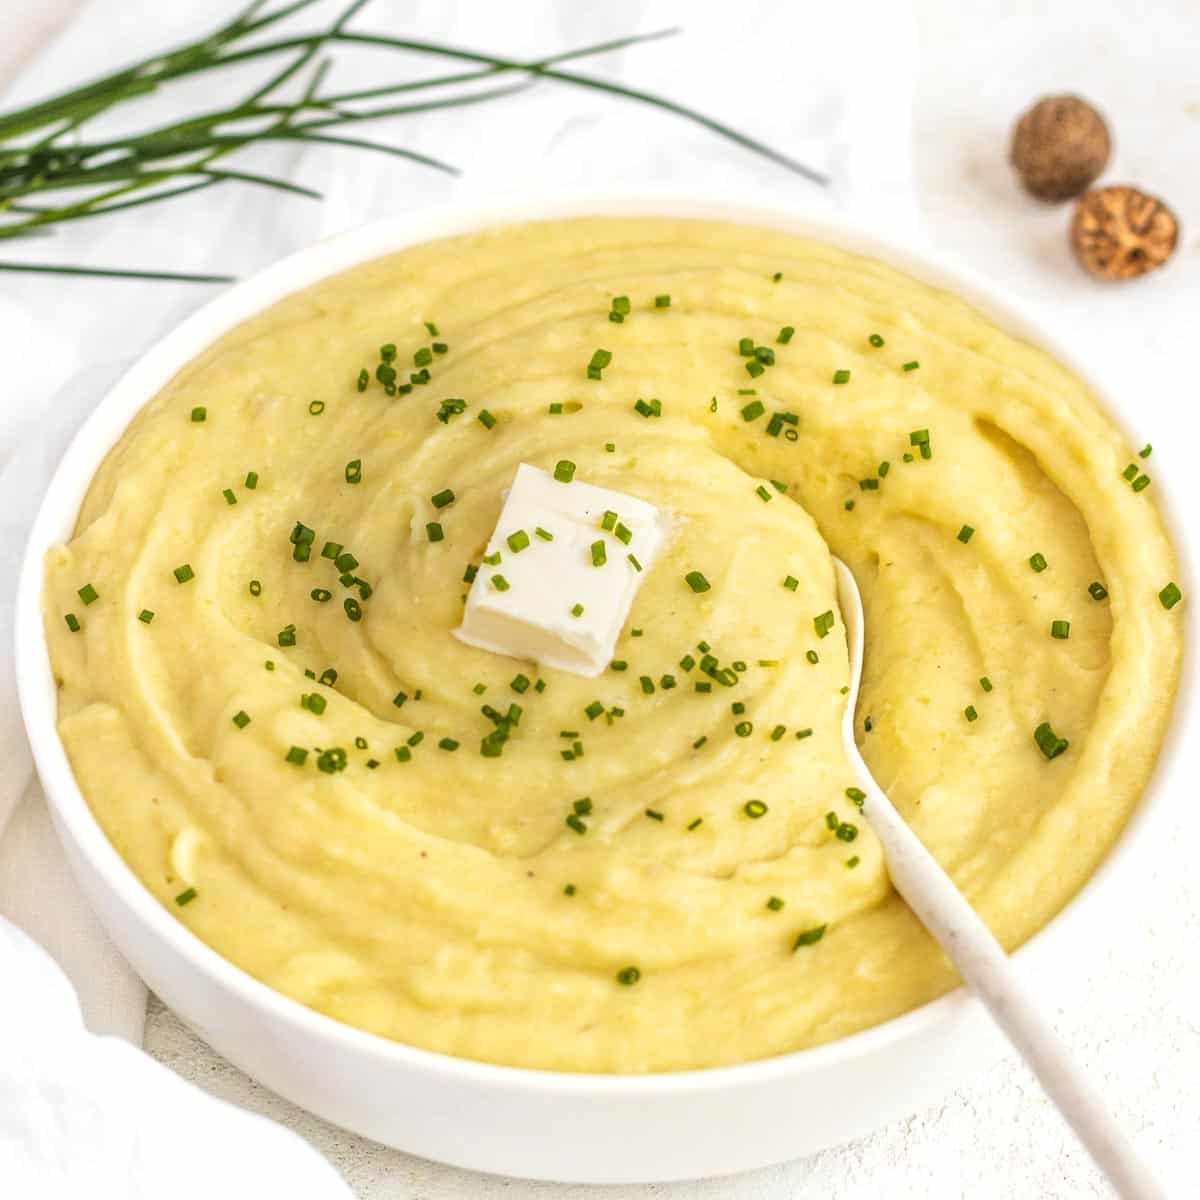 Mashed potatoes with white spoon